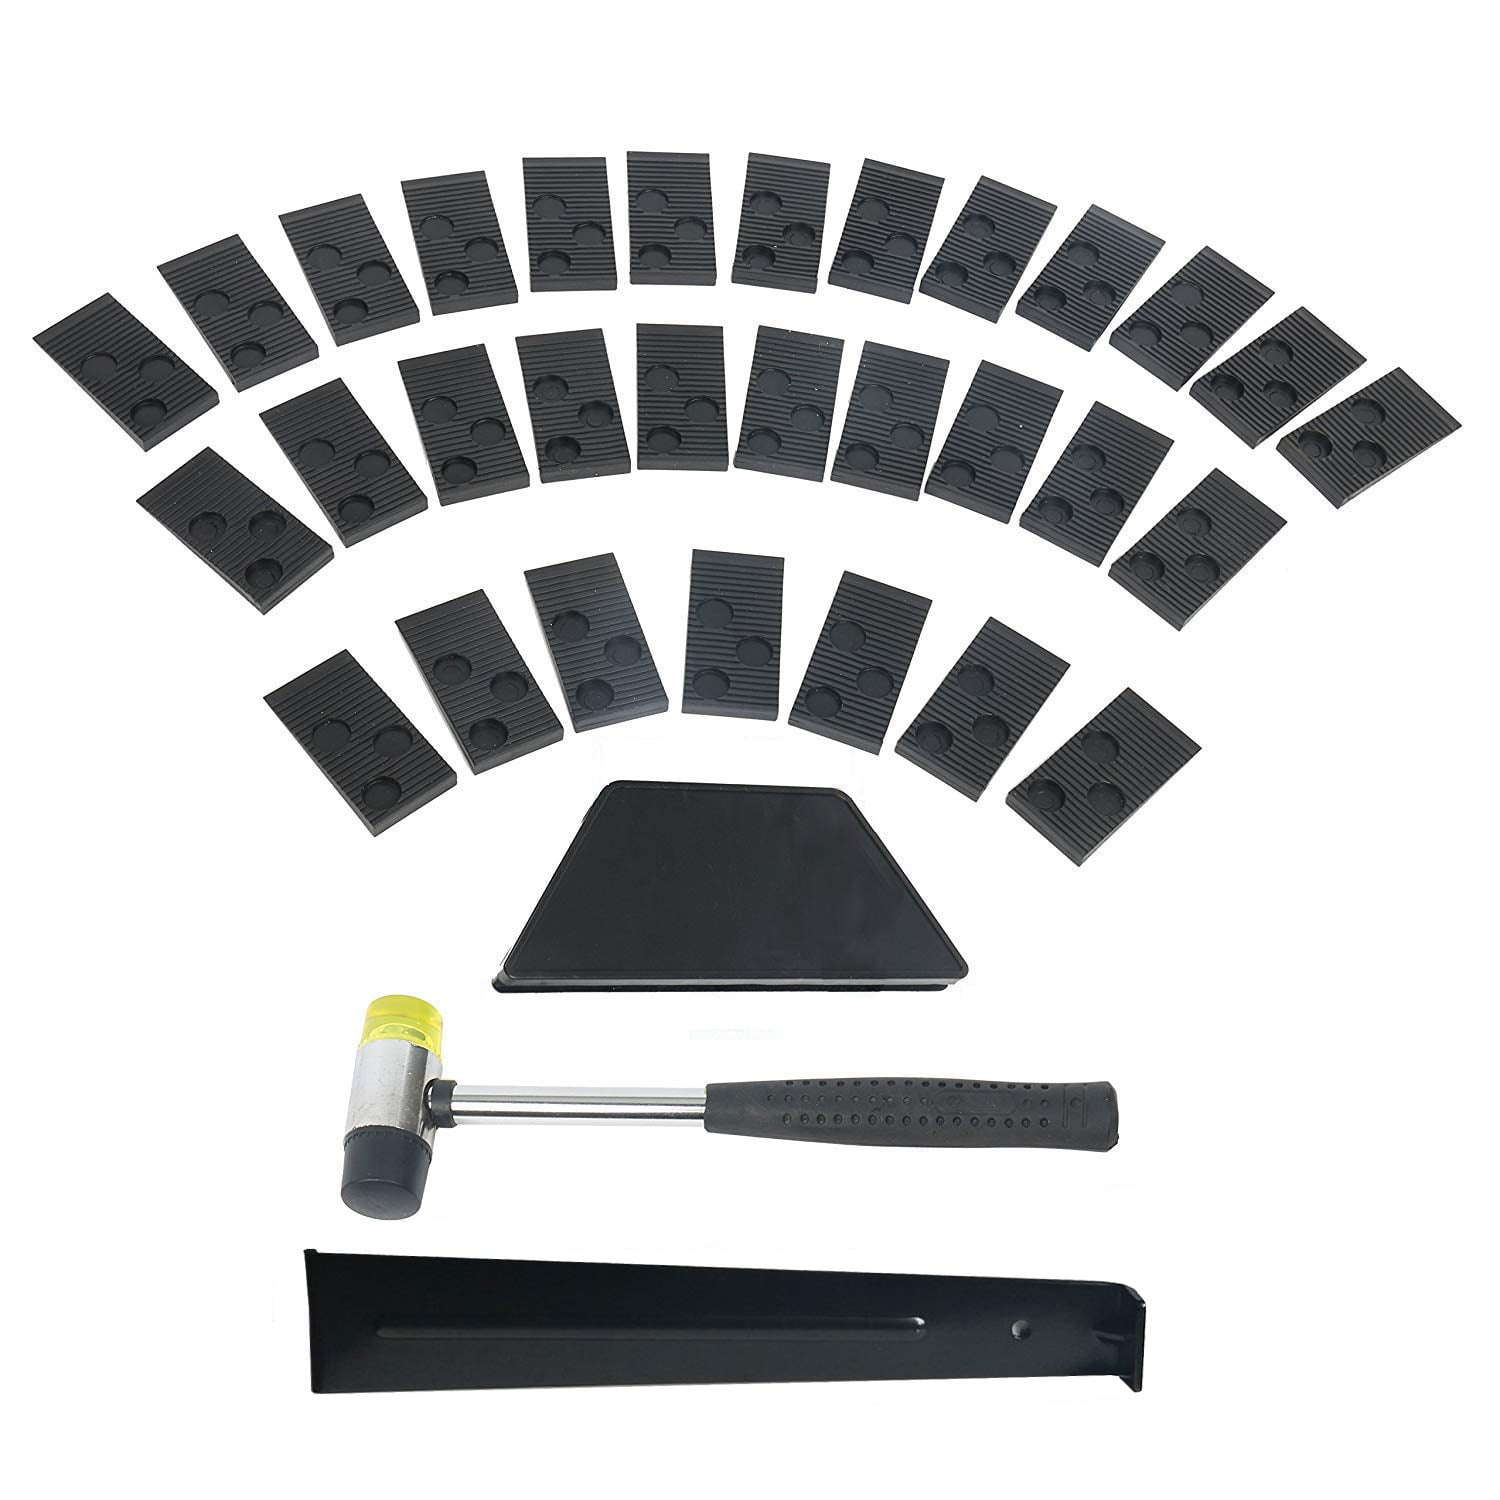 YaeTek Laminate Wood Flooring Installation Kit with 30 Spacers, Tapping  Block, Pull Bar and Mallet - Walmart.com